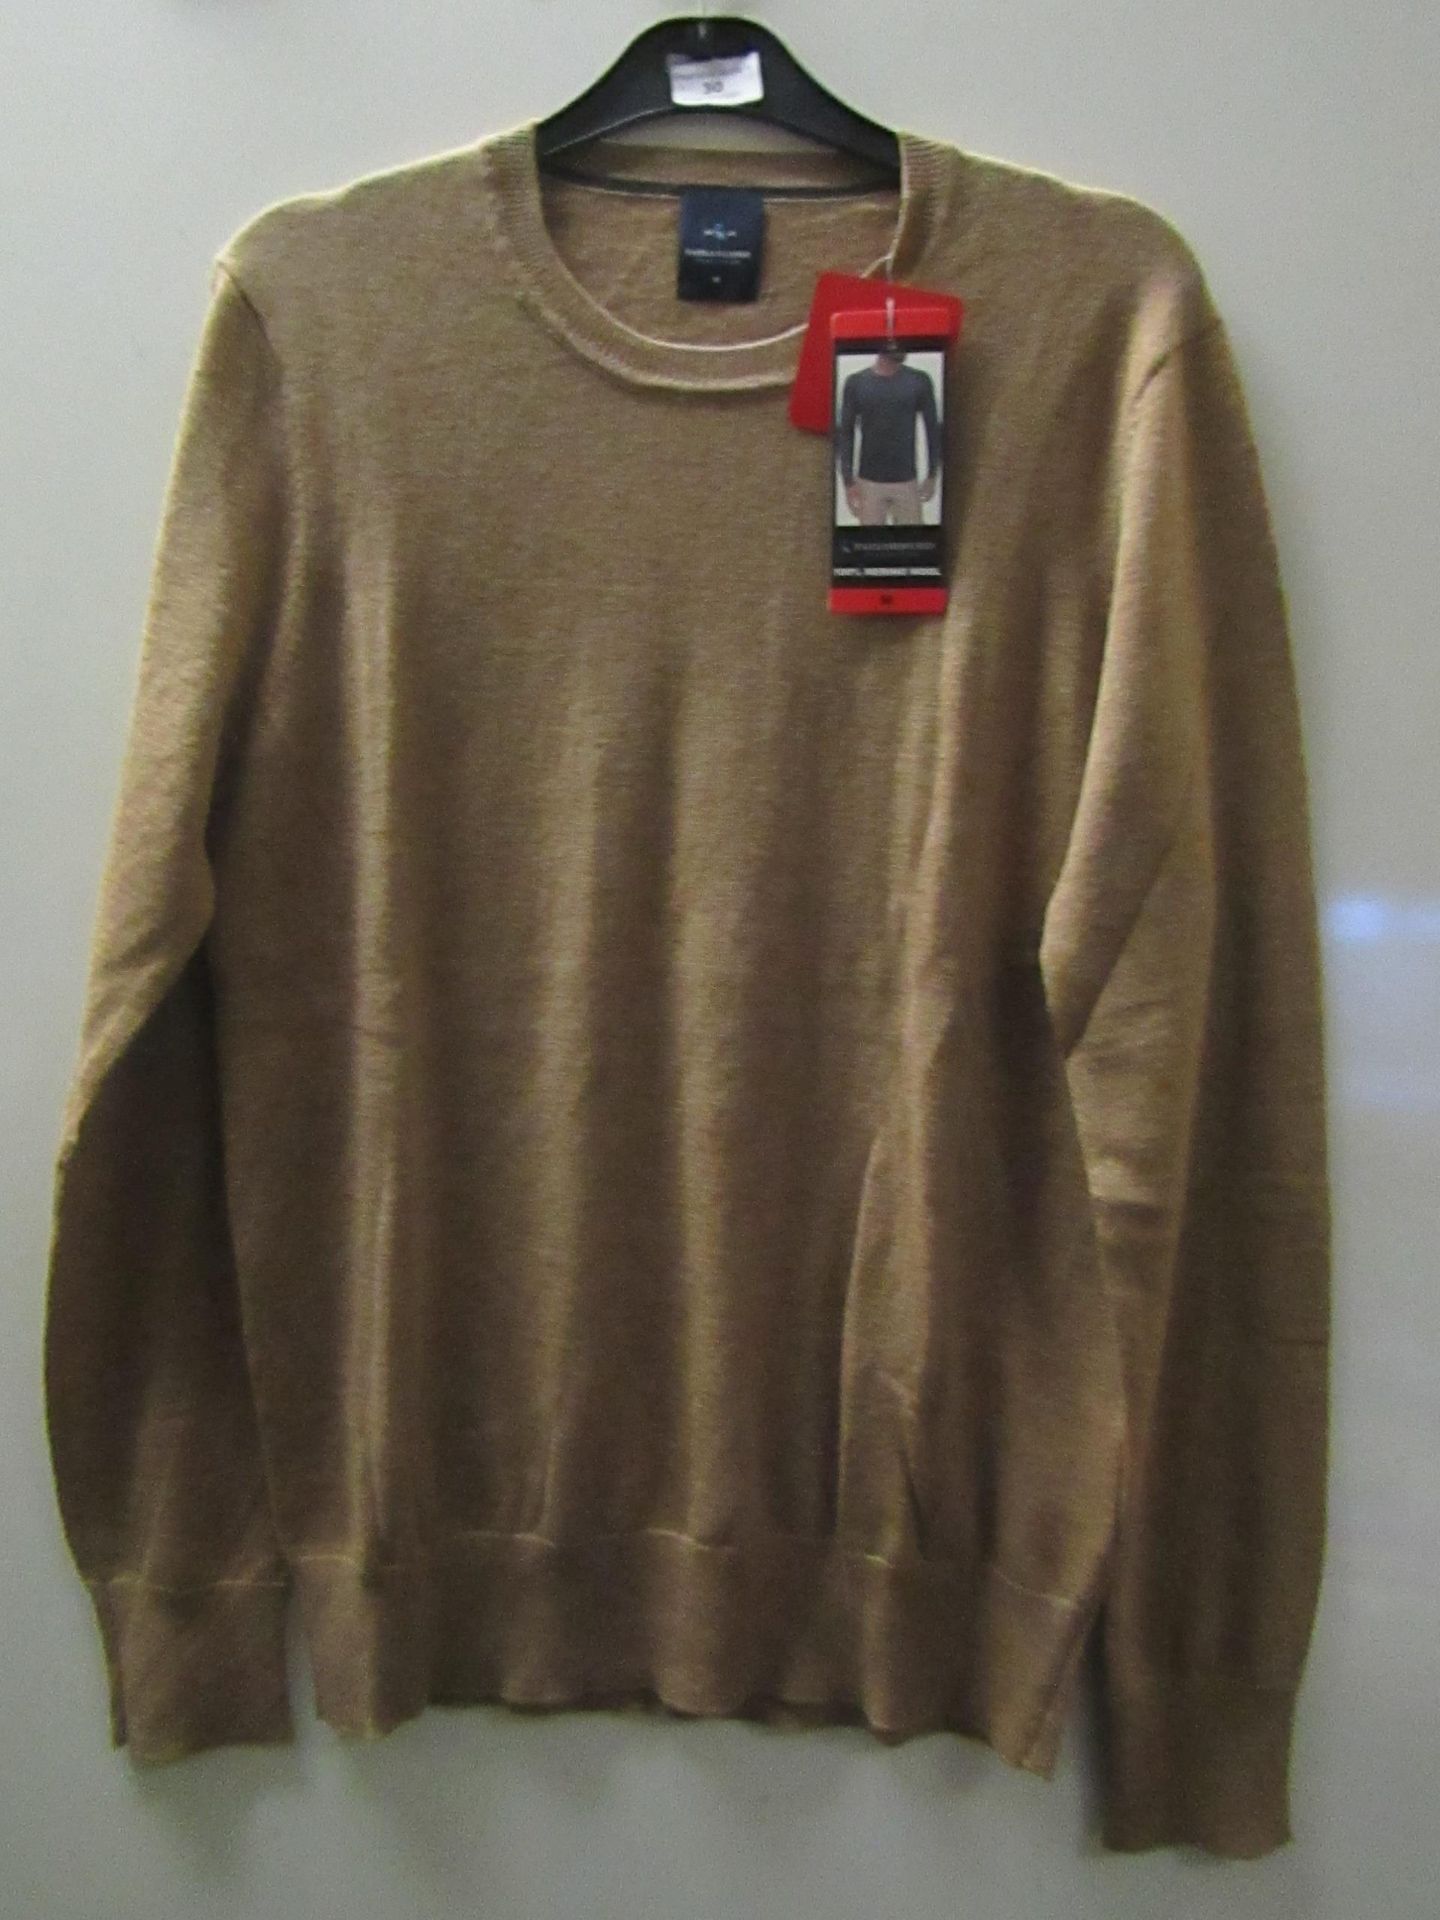 Tailorbyrd Merino Wool Sweater beige Size M (has Small Hole near neck otherwise new with tags